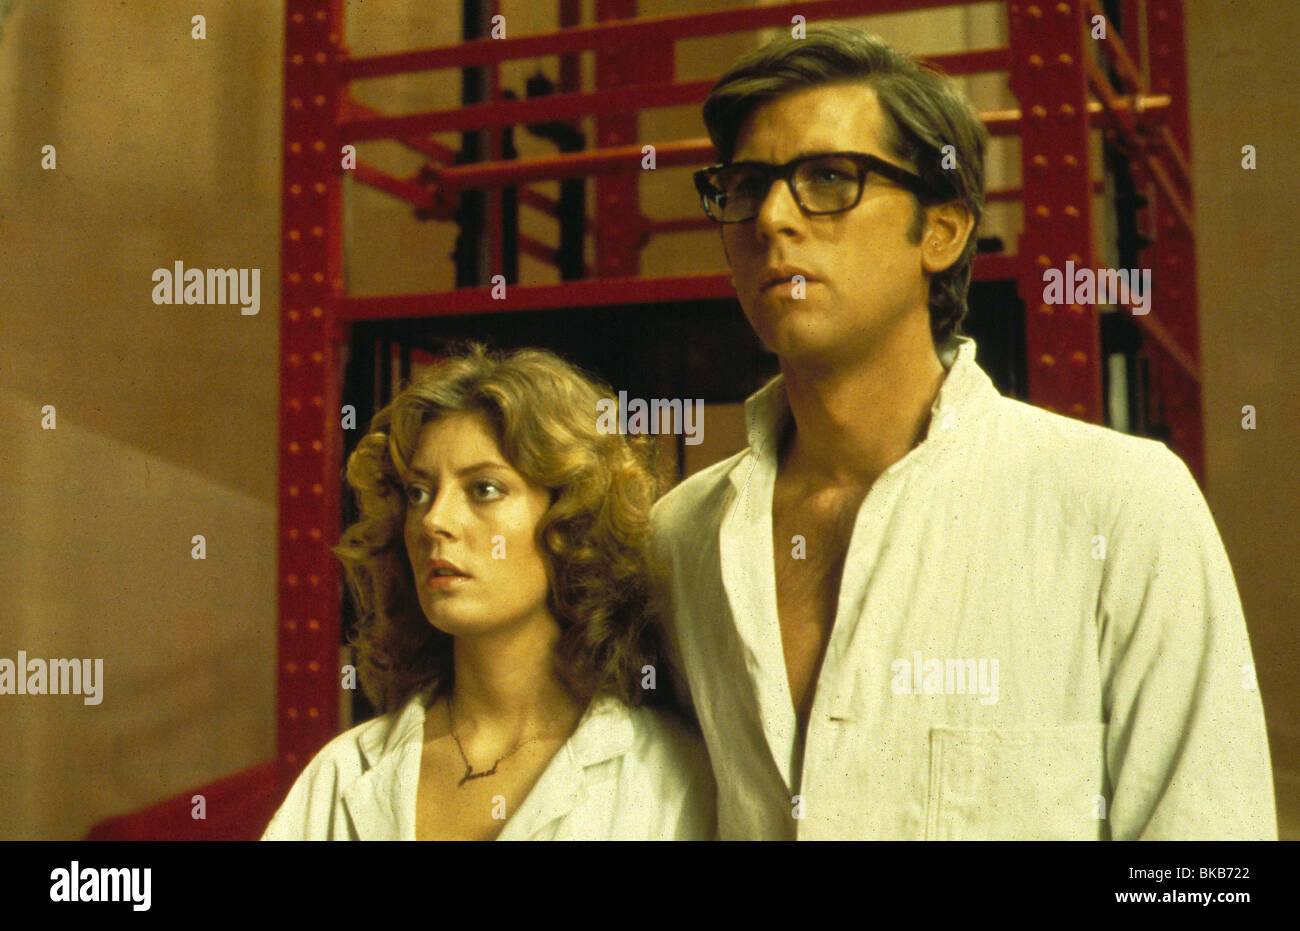 THE ROCKY HORROR PICTURE SHOW (1975) SUSAN SARANDON, BARRY BOSTWICK RHPS 002 Stock Photo